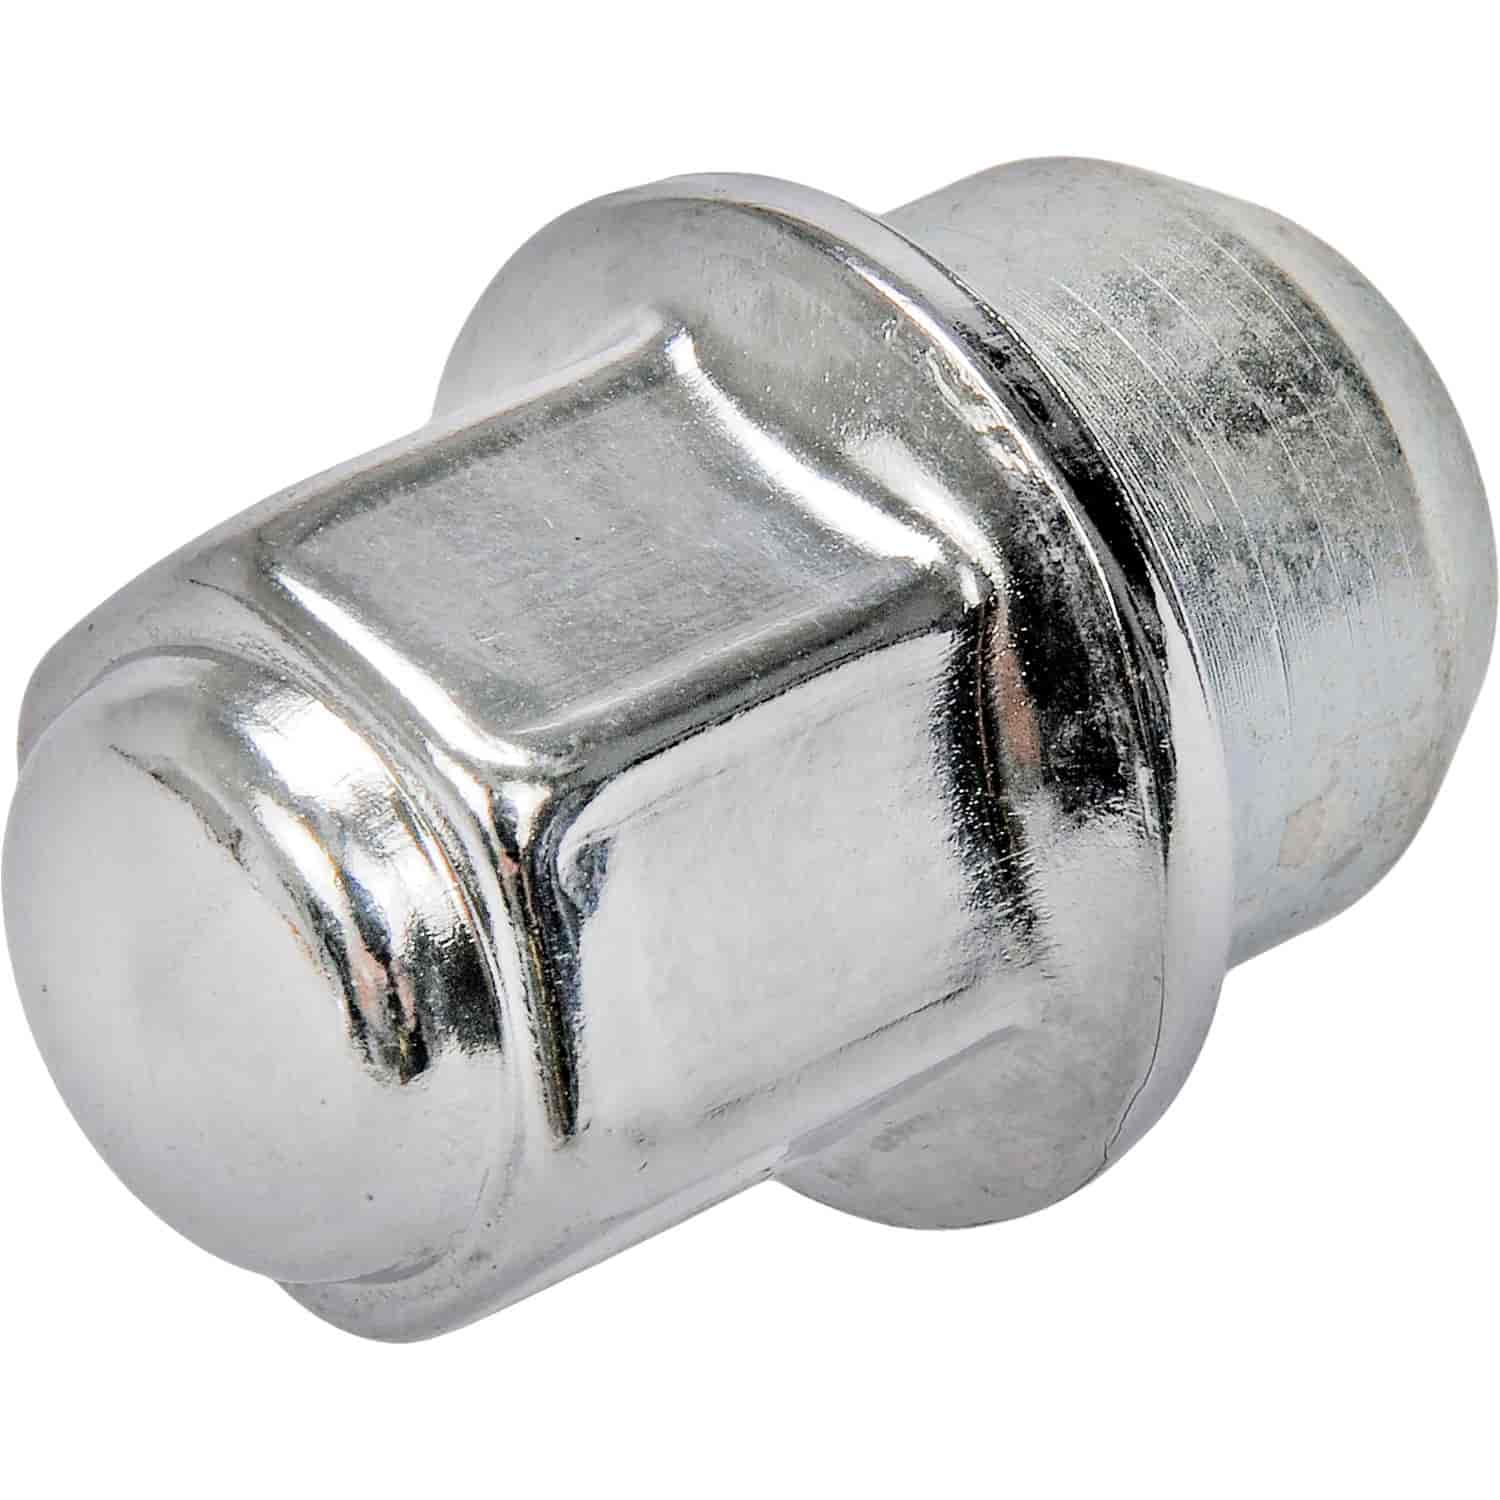 Wheel Nut M12-1.50 Dometop Capped Nut - 19mm Hex 37.6mm Length